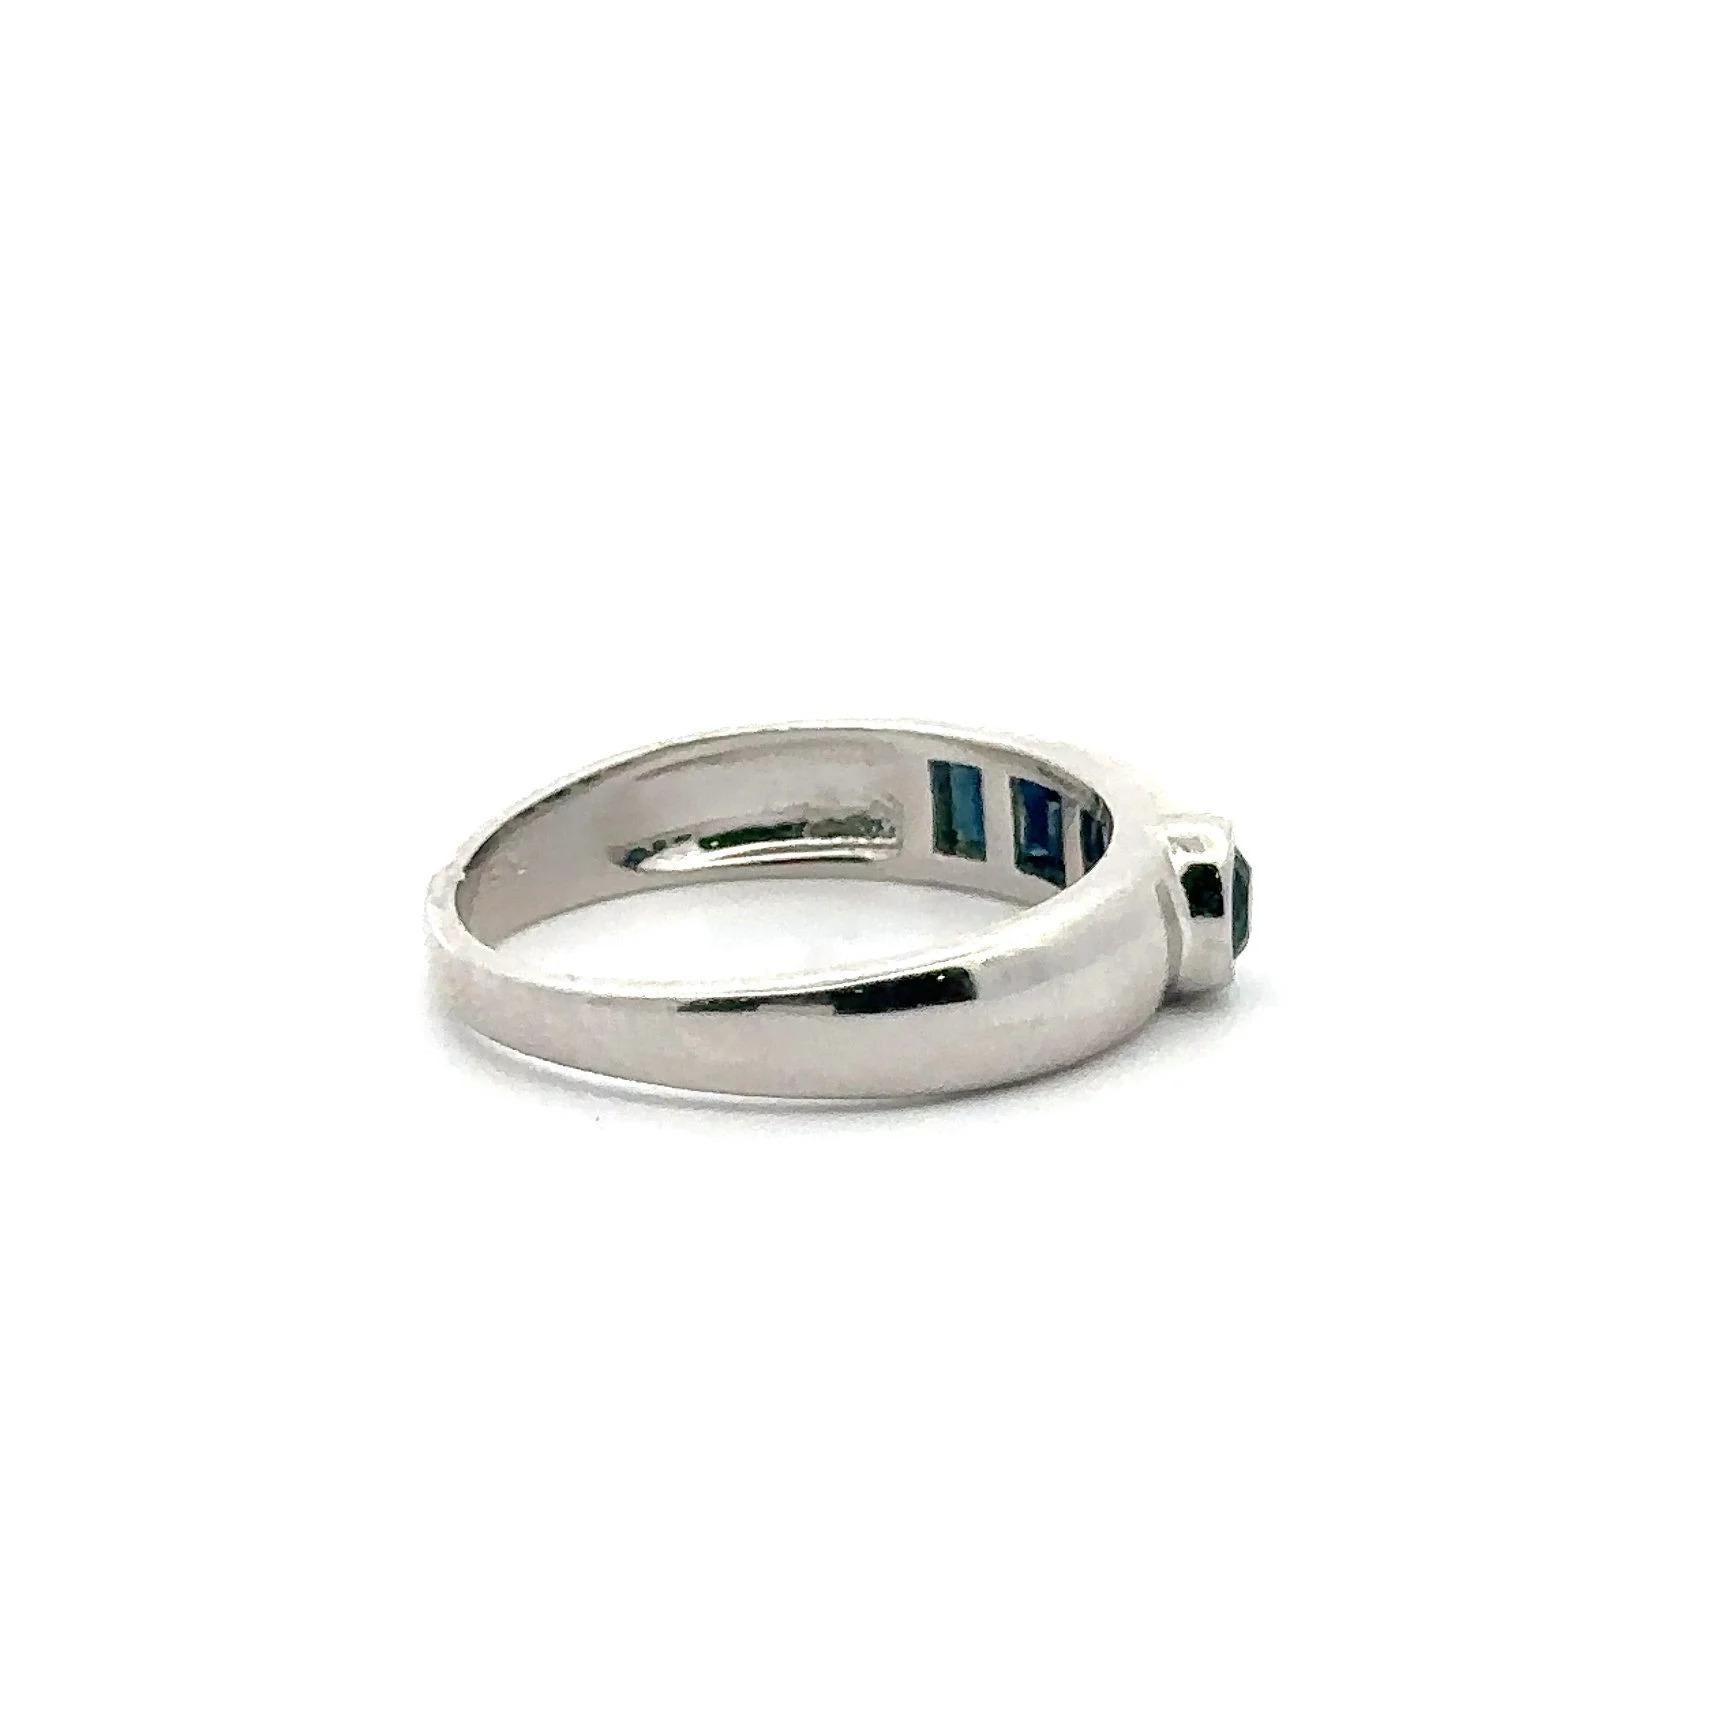 For Sale:  Unique Blue Sapphire Gemstone Band Ring in 925 Sterling Silver, Unisex Ring 3